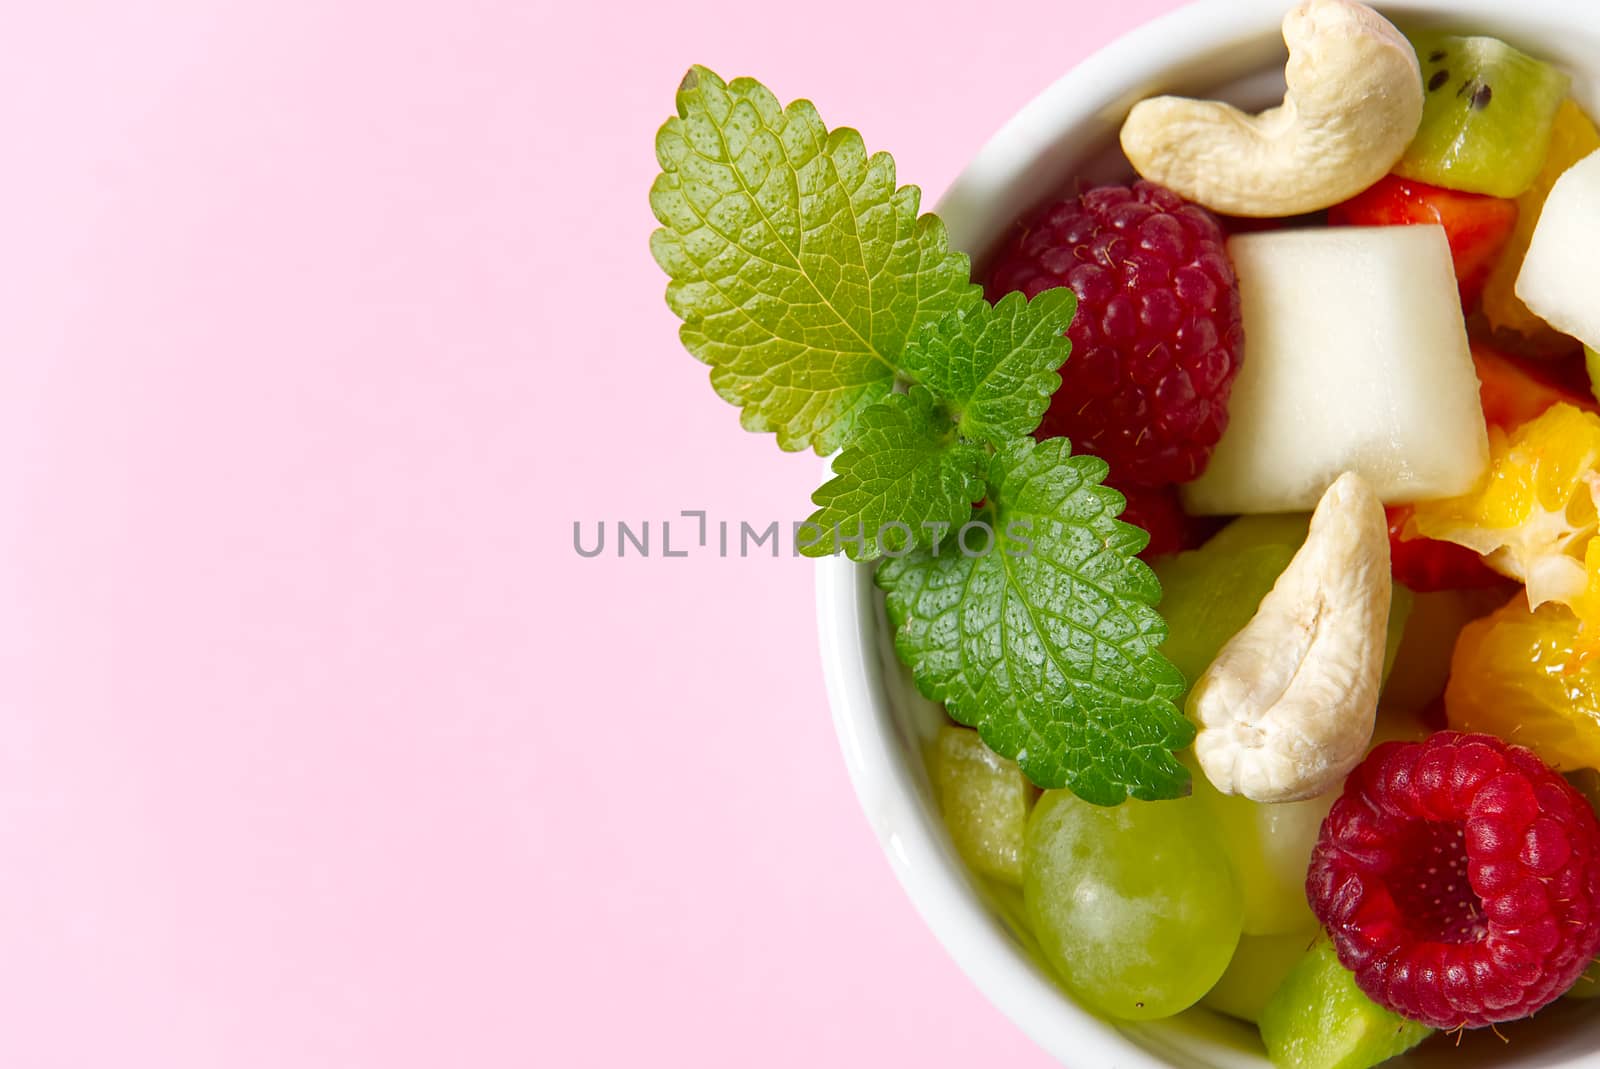 Fresh fruit salad on white bowl. Mixed fruit in white bowl healthy food style. Useful fruit salad of fresh fruits and berries on pink background. three bowls with fruit salad by PhotoTime